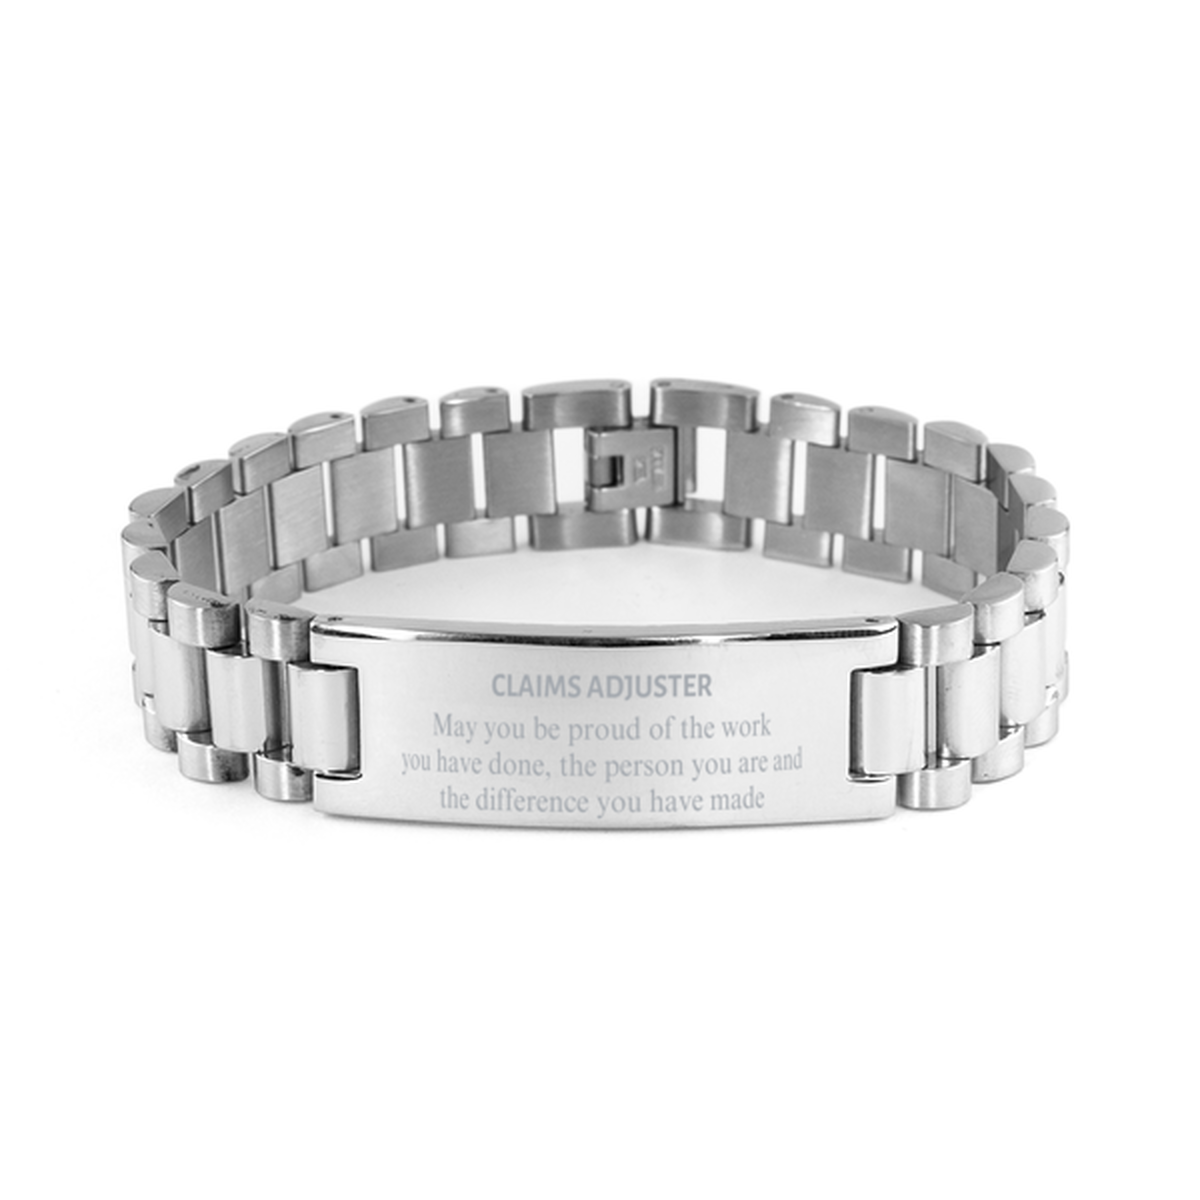 Claims Adjuster May you be proud of the work you have done, Retirement Claims Adjuster Ladder Stainless Steel Bracelet for Colleague Appreciation Gifts Amazing for Claims Adjuster